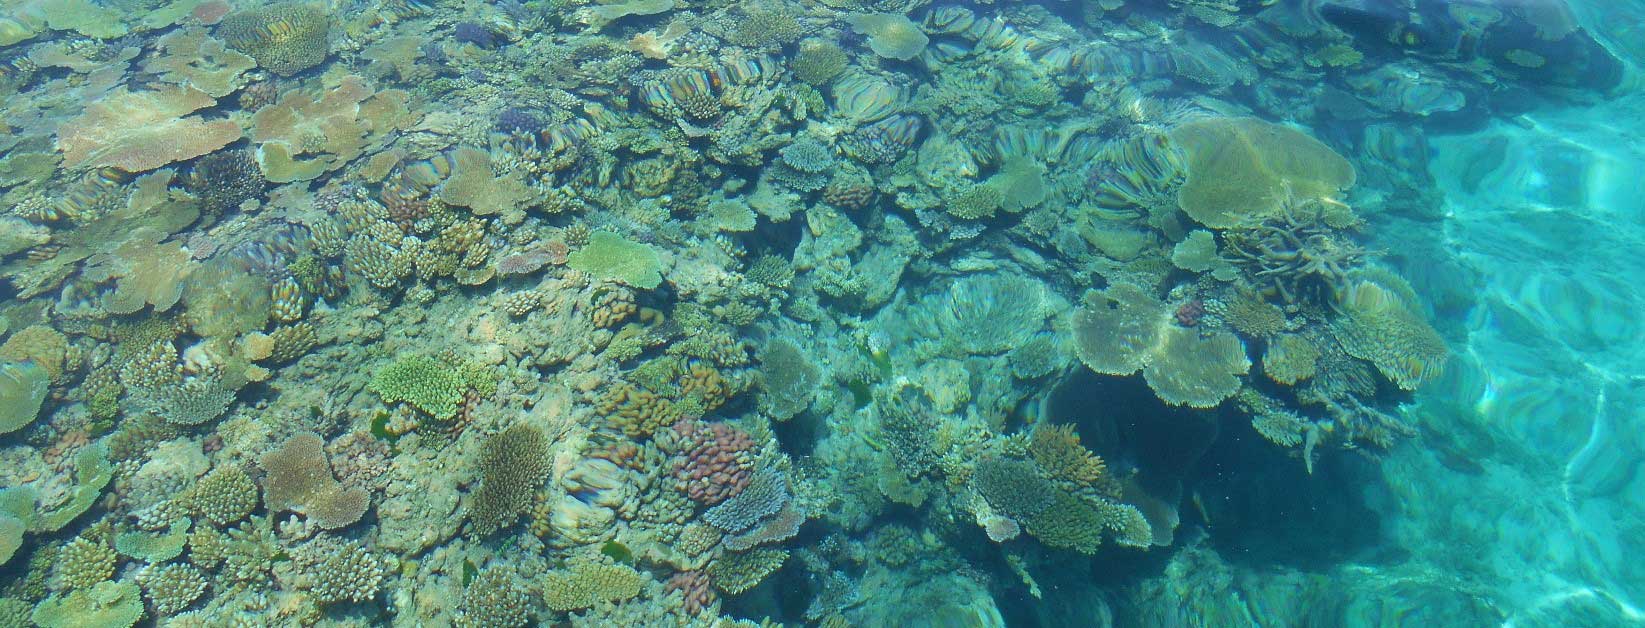 An artificial reef which it is hoped will restore coral reefs in the Great Barrier Reed area.